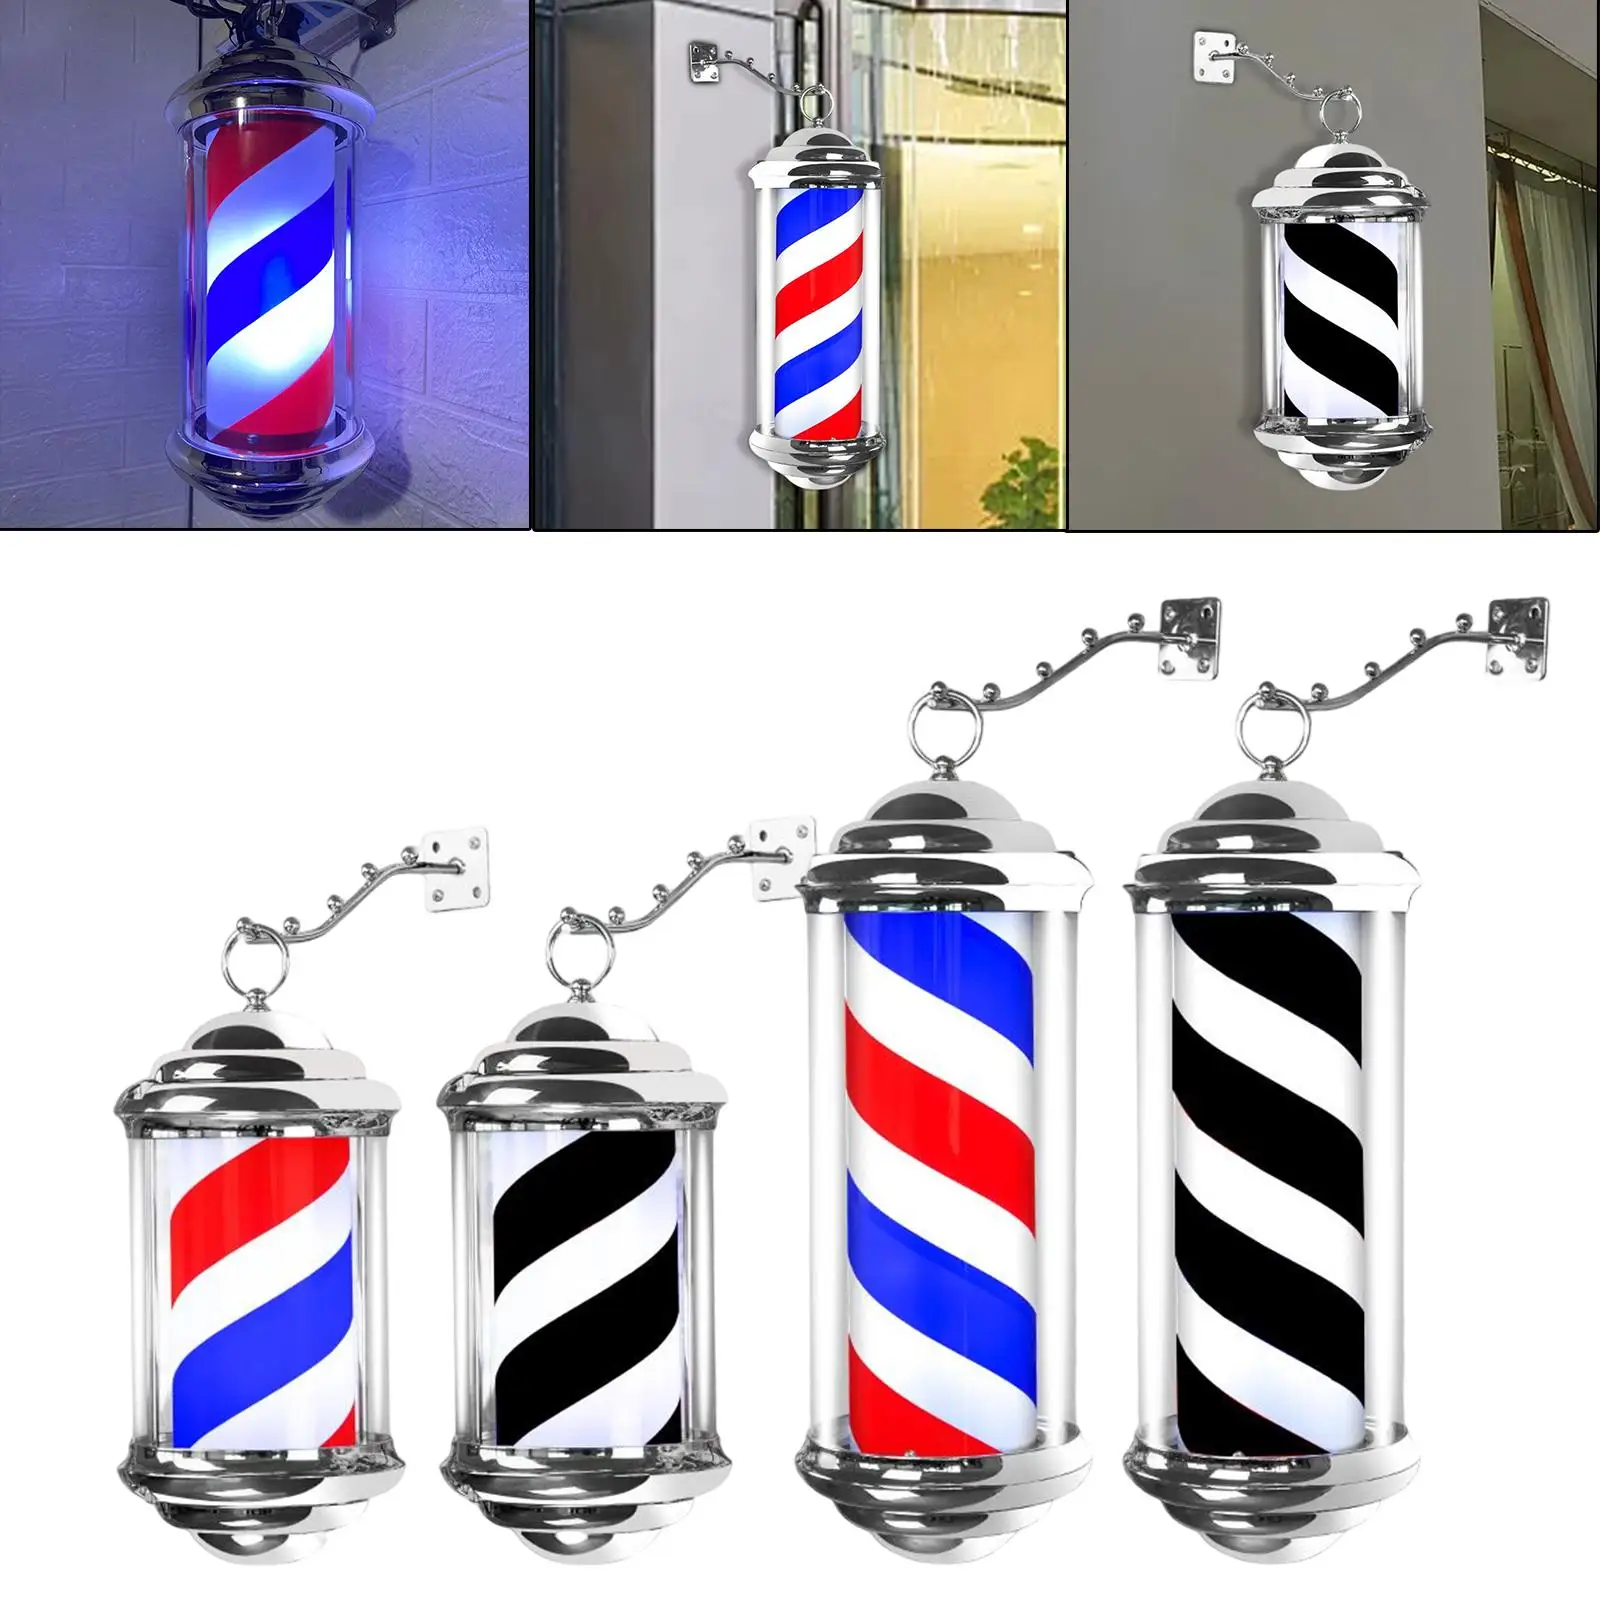  Salon Sign Light Rotating  Saving Wall Mount Wall / Hanging Bracket Stripes Retro Style Barber Pole Light for Outdoor